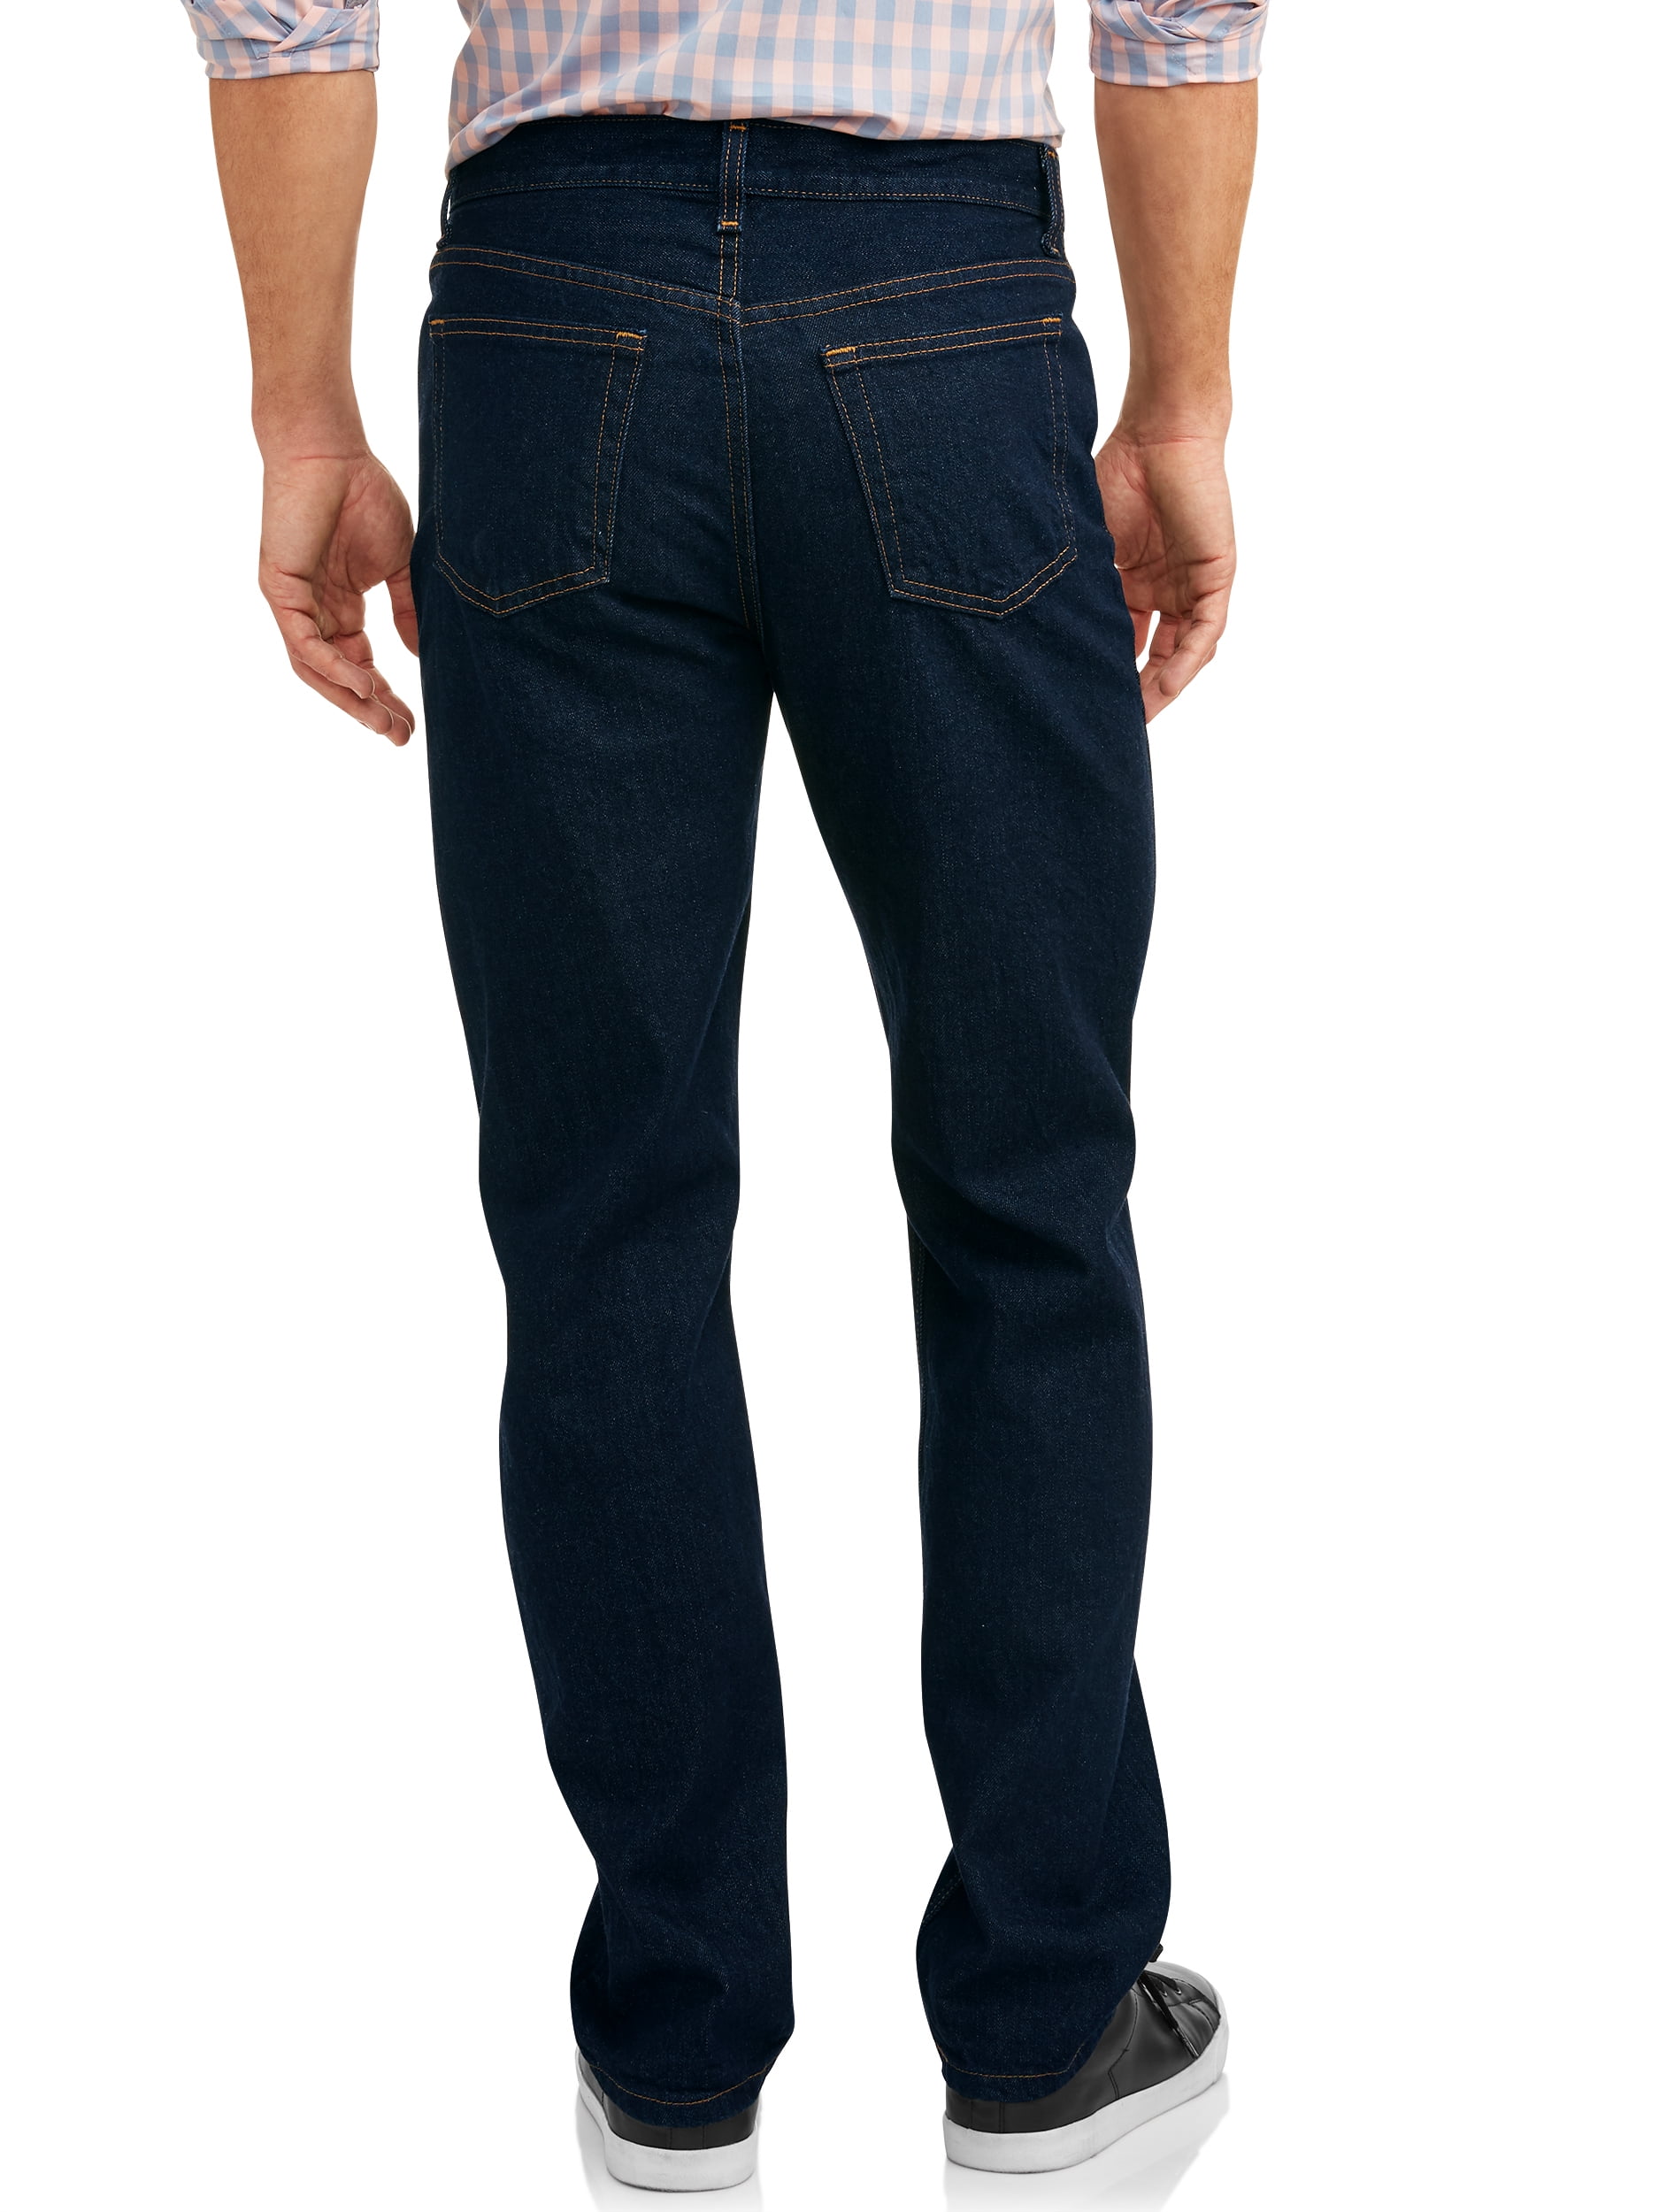 walmart george jeans review